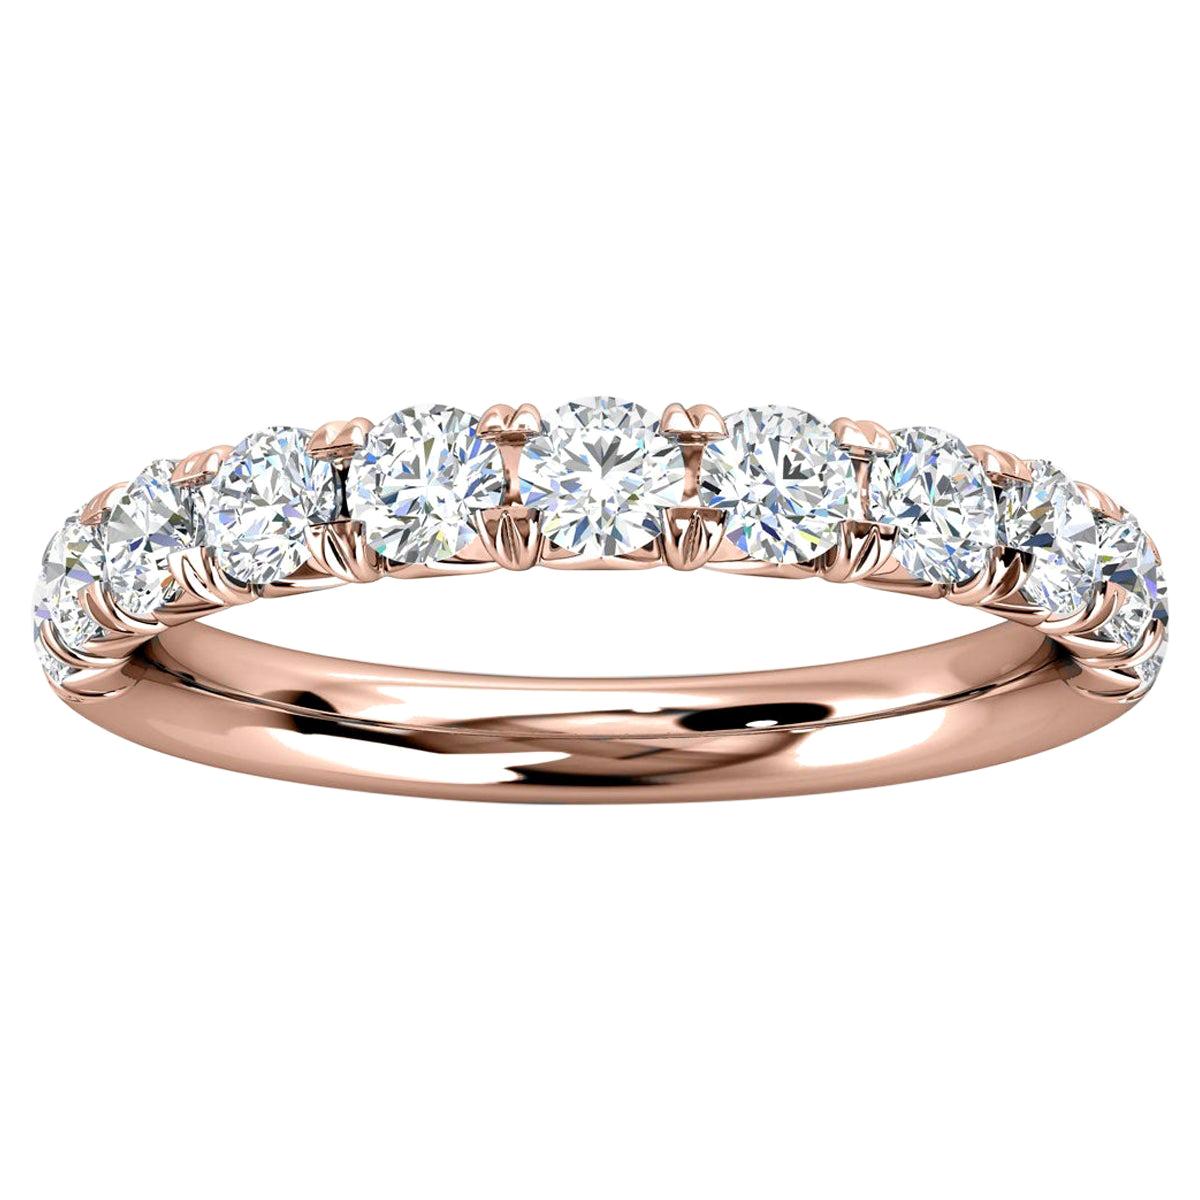 For Sale:  18K Rose Gold Voyage French Pave Diamond Ring '3/4 Ct. tw'